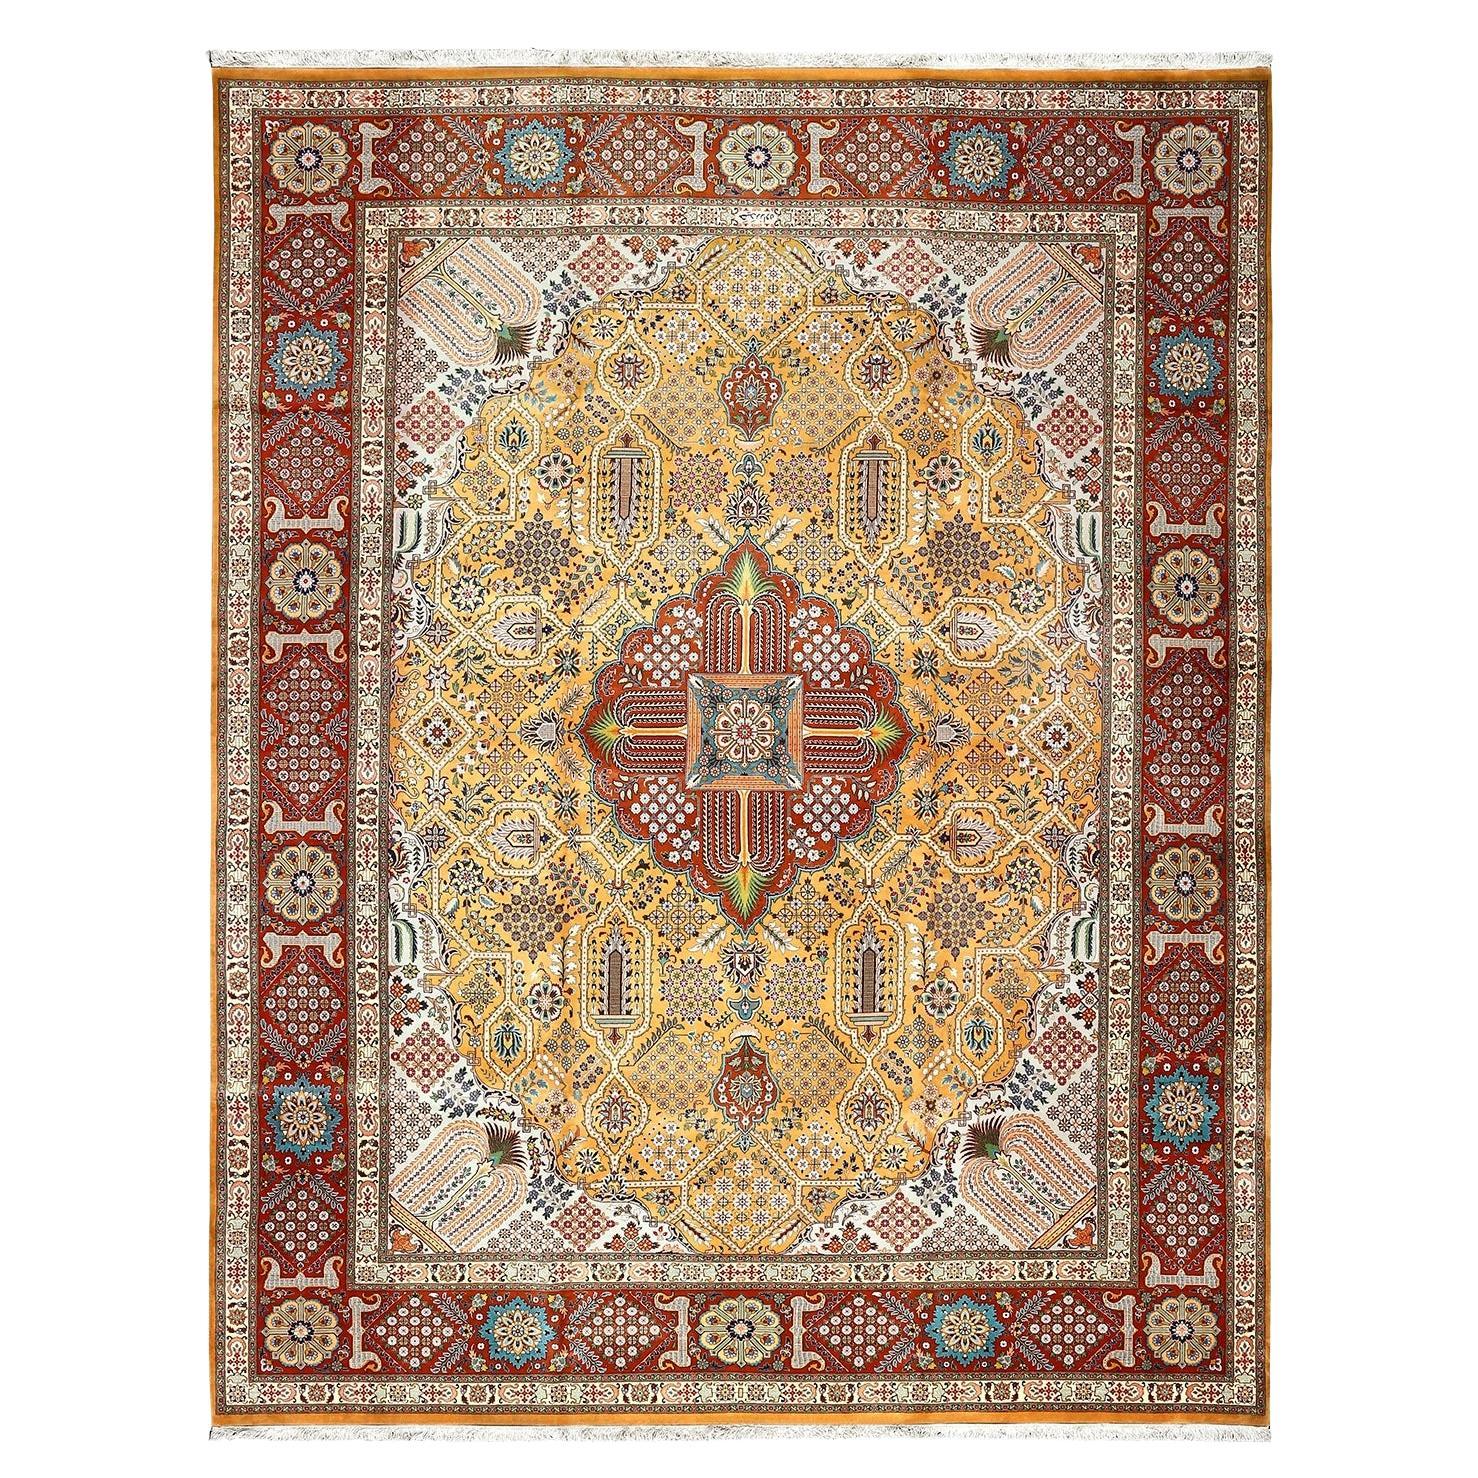 Damoka Collection Vintage Tabriz Heydarzadeh - Size: 12 ft 8 in x 10 ft 1 in